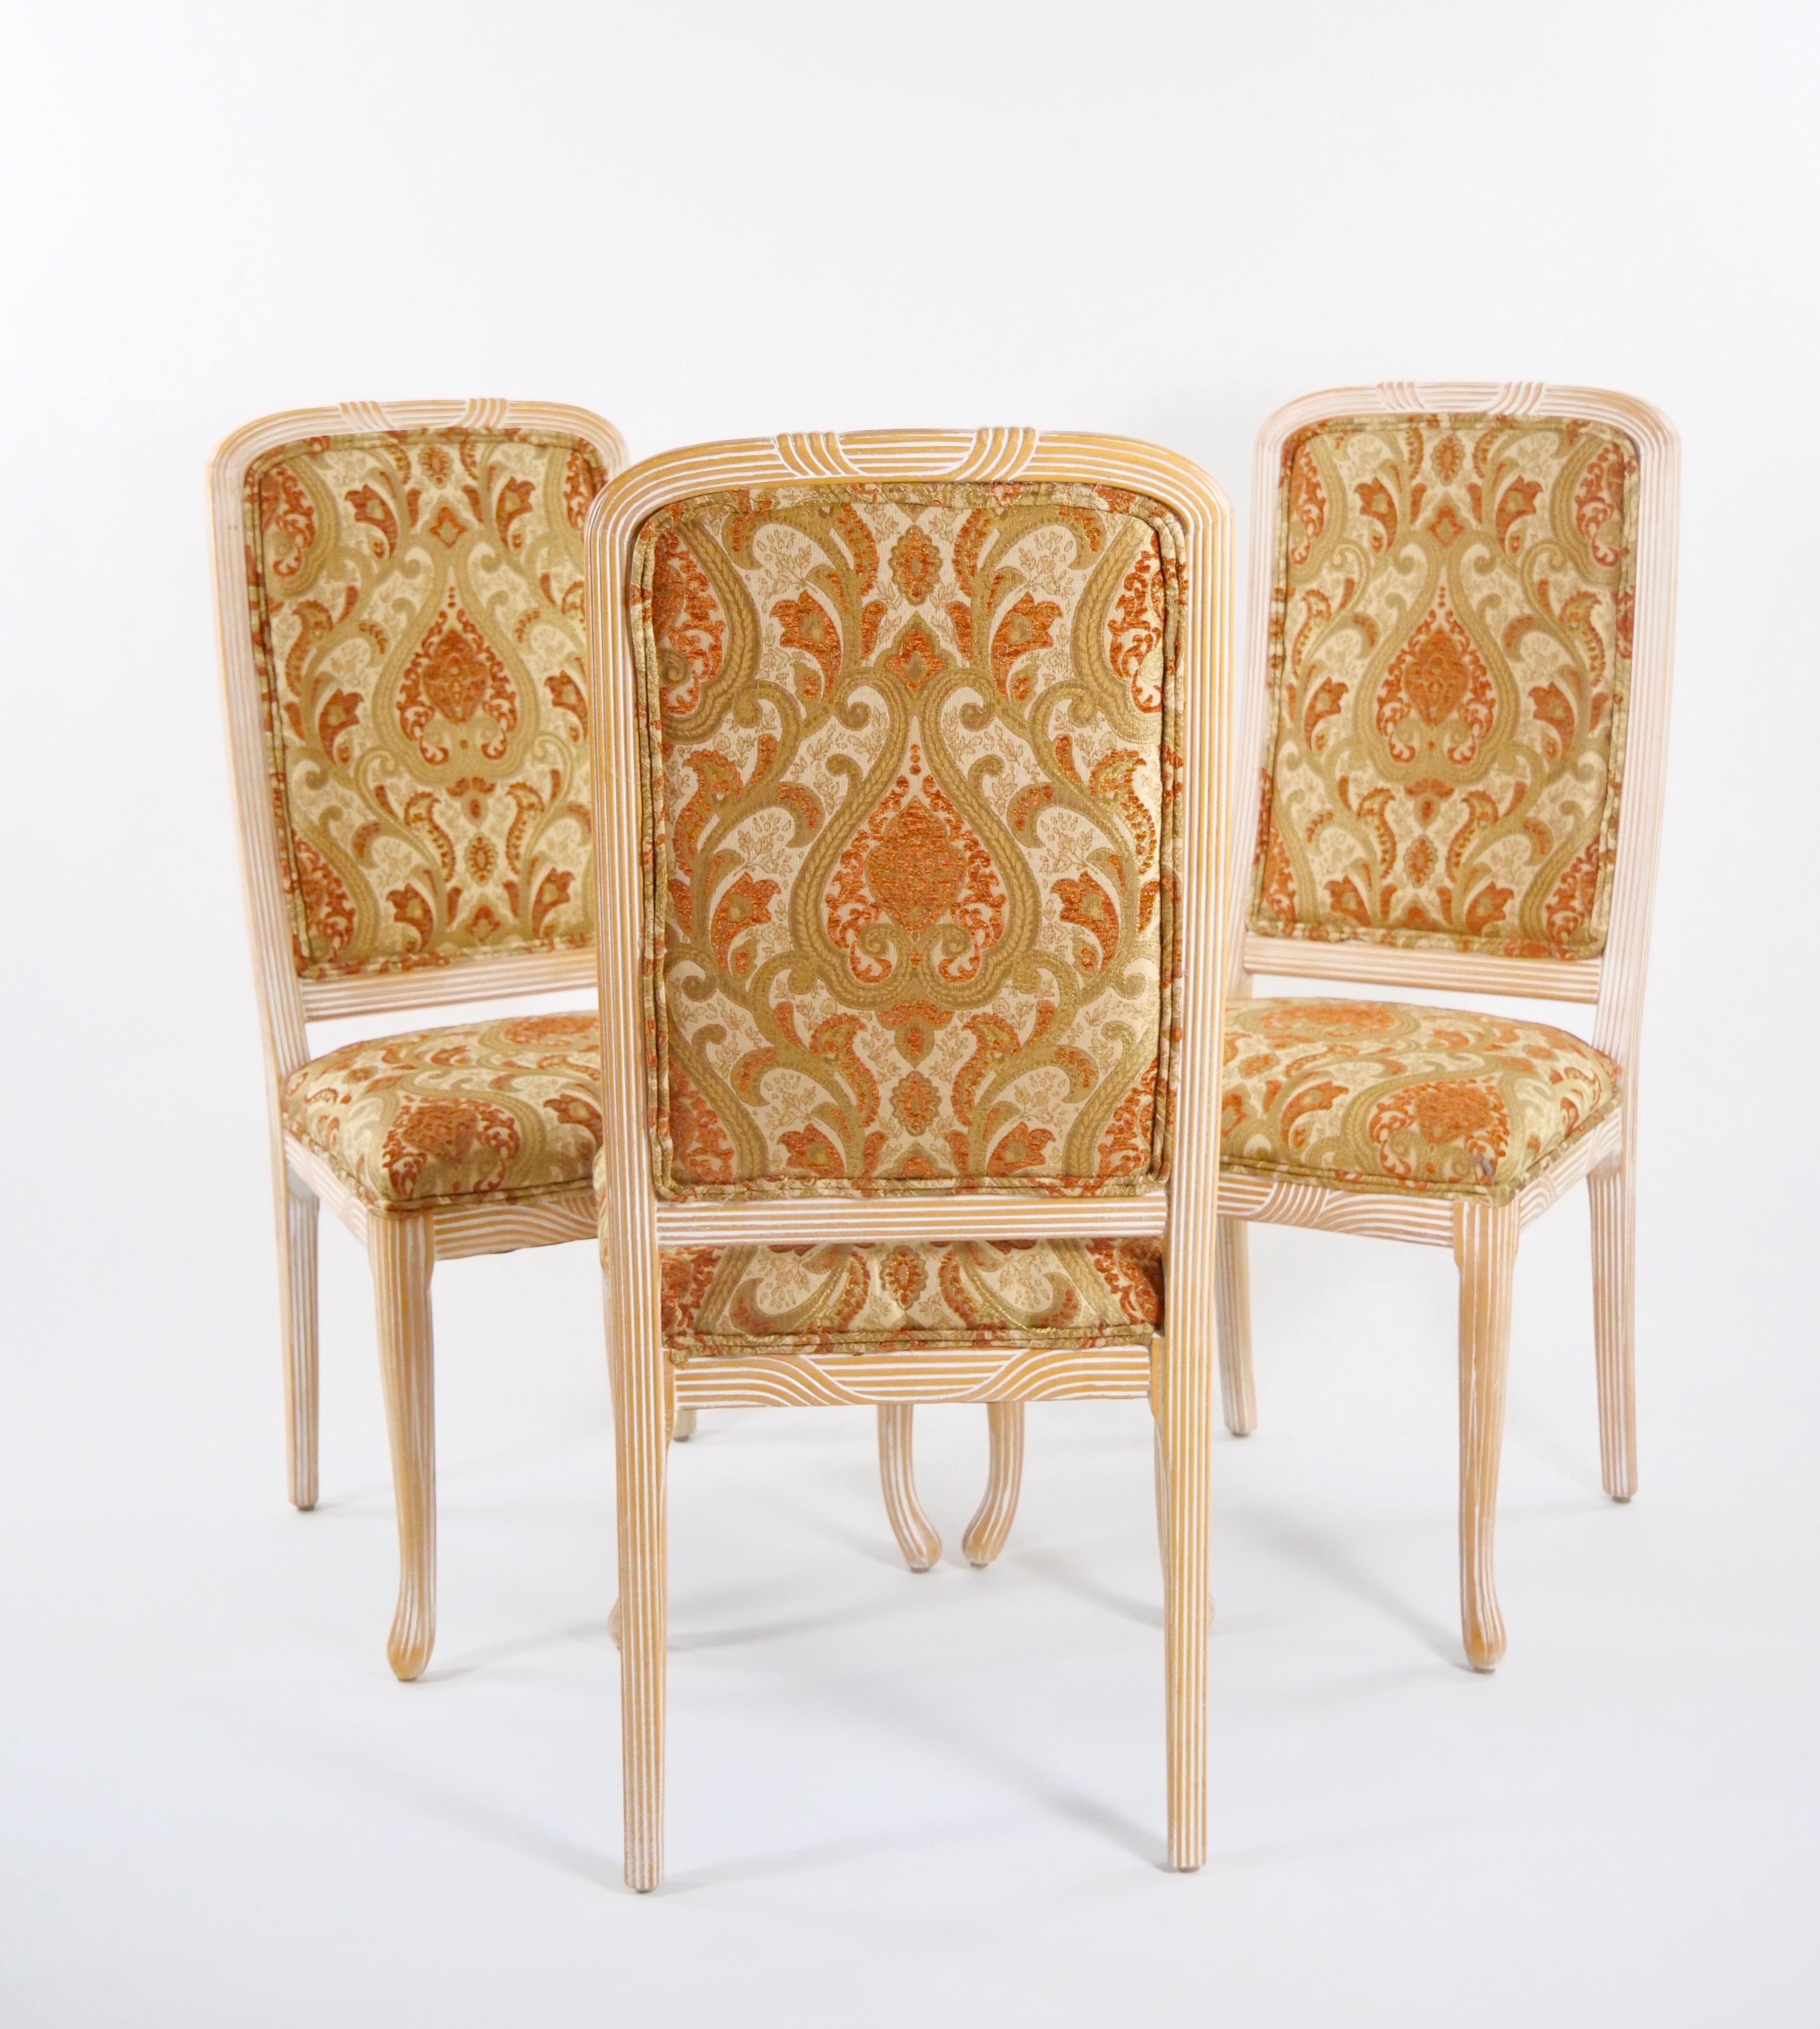 Italian Hand Painted / Carved Upholstered Dining Room Chair Set For Sale 6